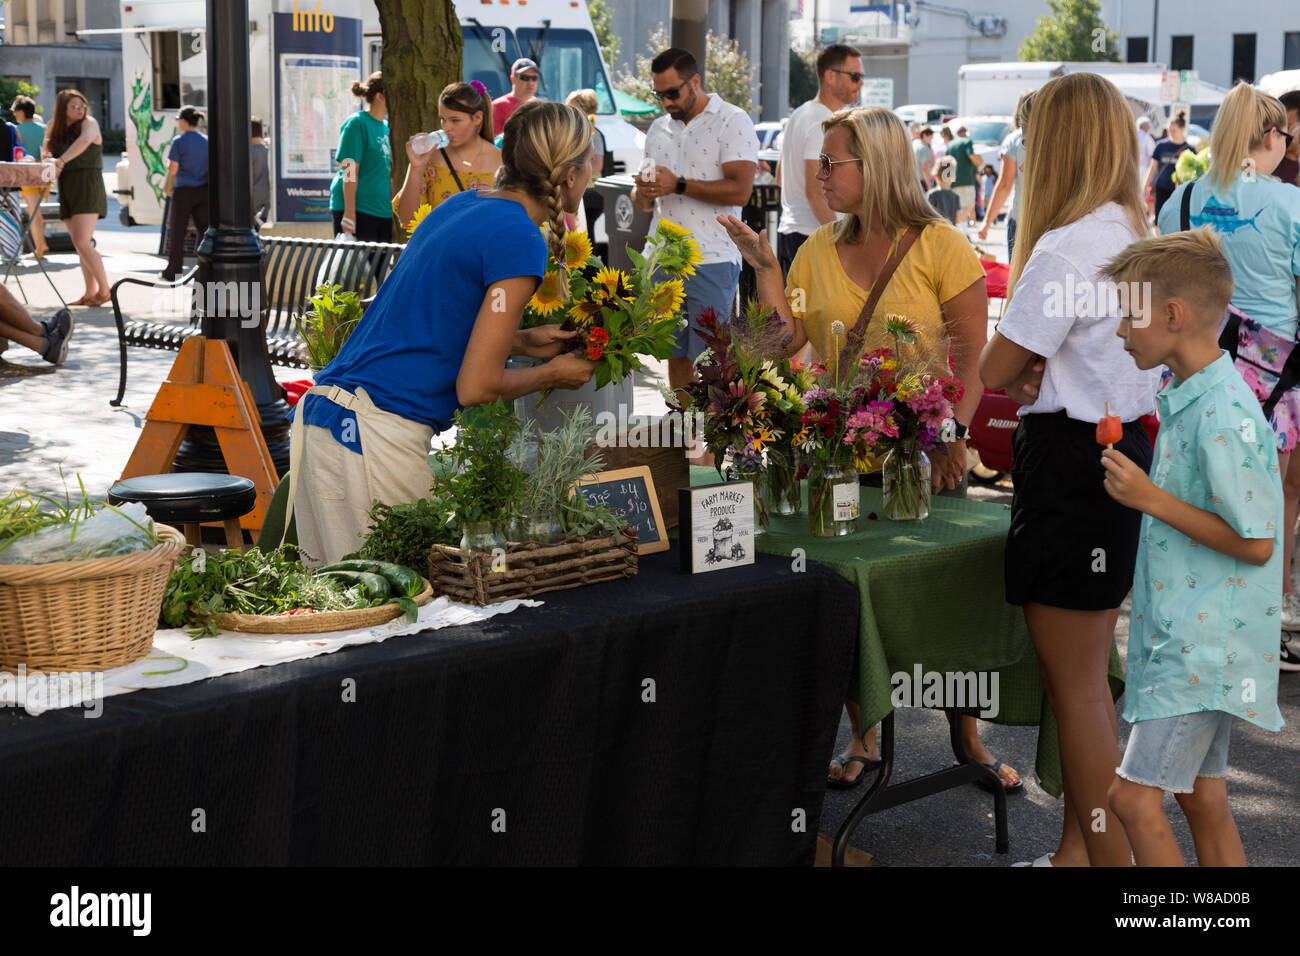 A flower vendor at Fort Wayne's Farmers' Market promotes her flowers to potential customers in downtown Fort Wayne, Indiana, USA. Stock Photo